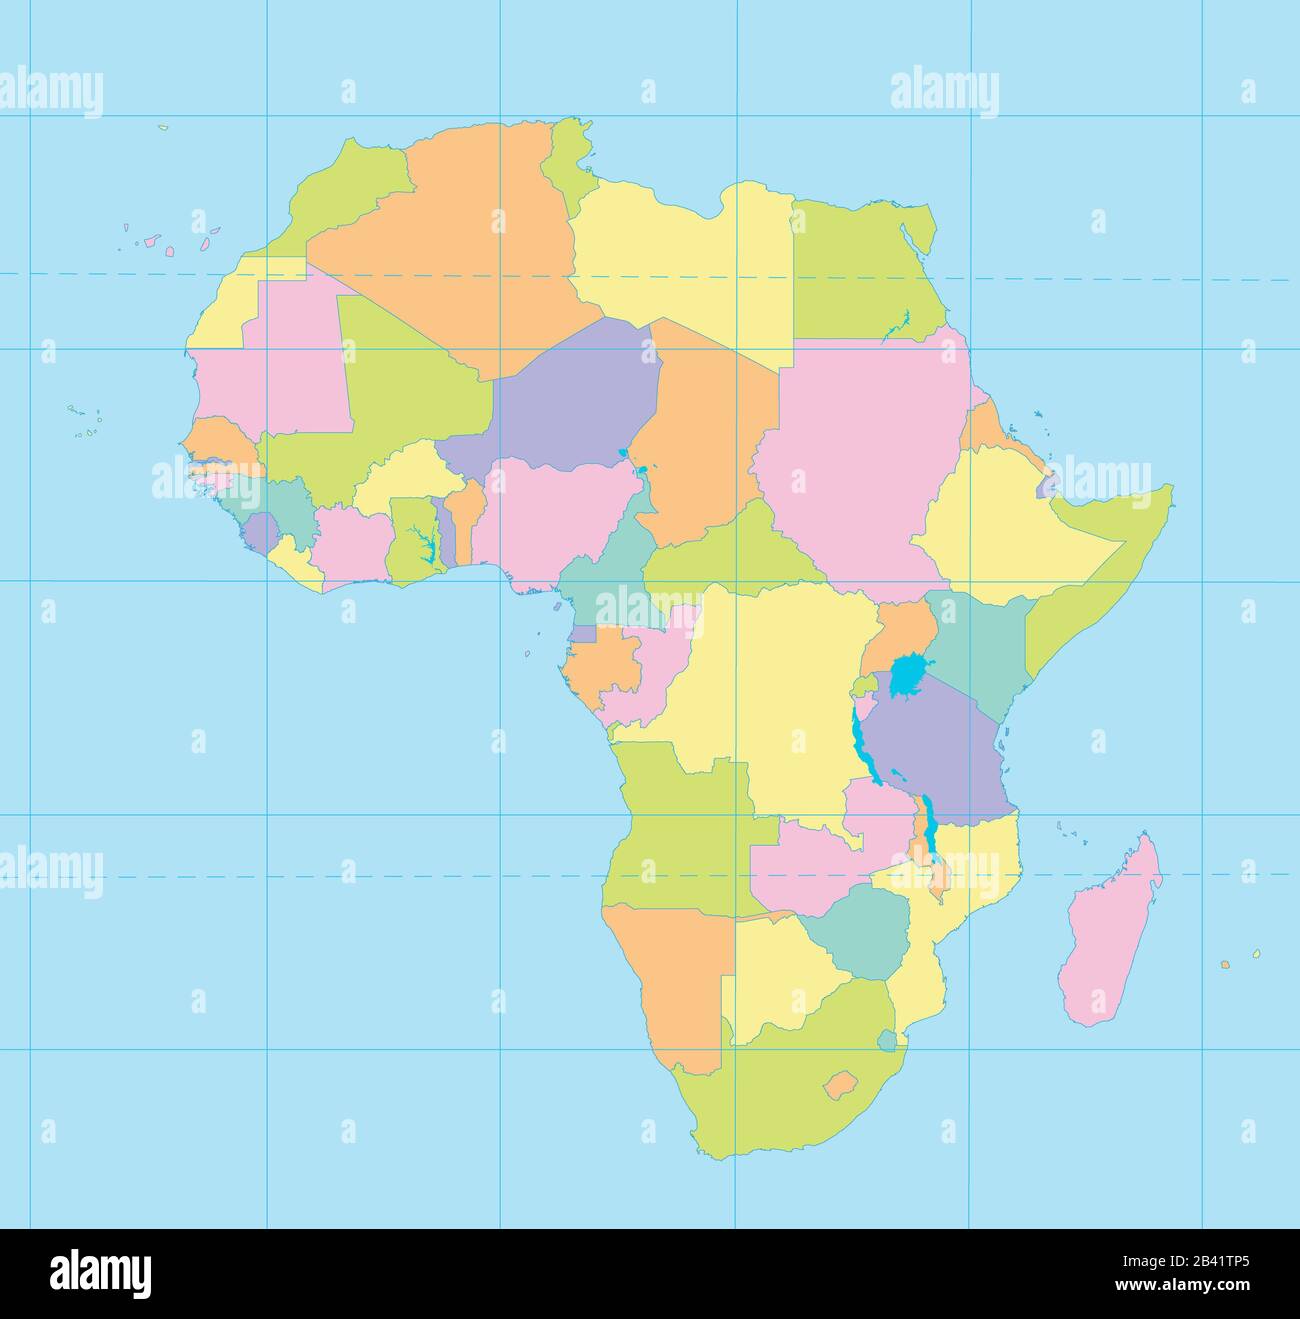 Africa map colorful, new political detailed map, separate individual states, with state city and sea names, blue background blank Stock Photo